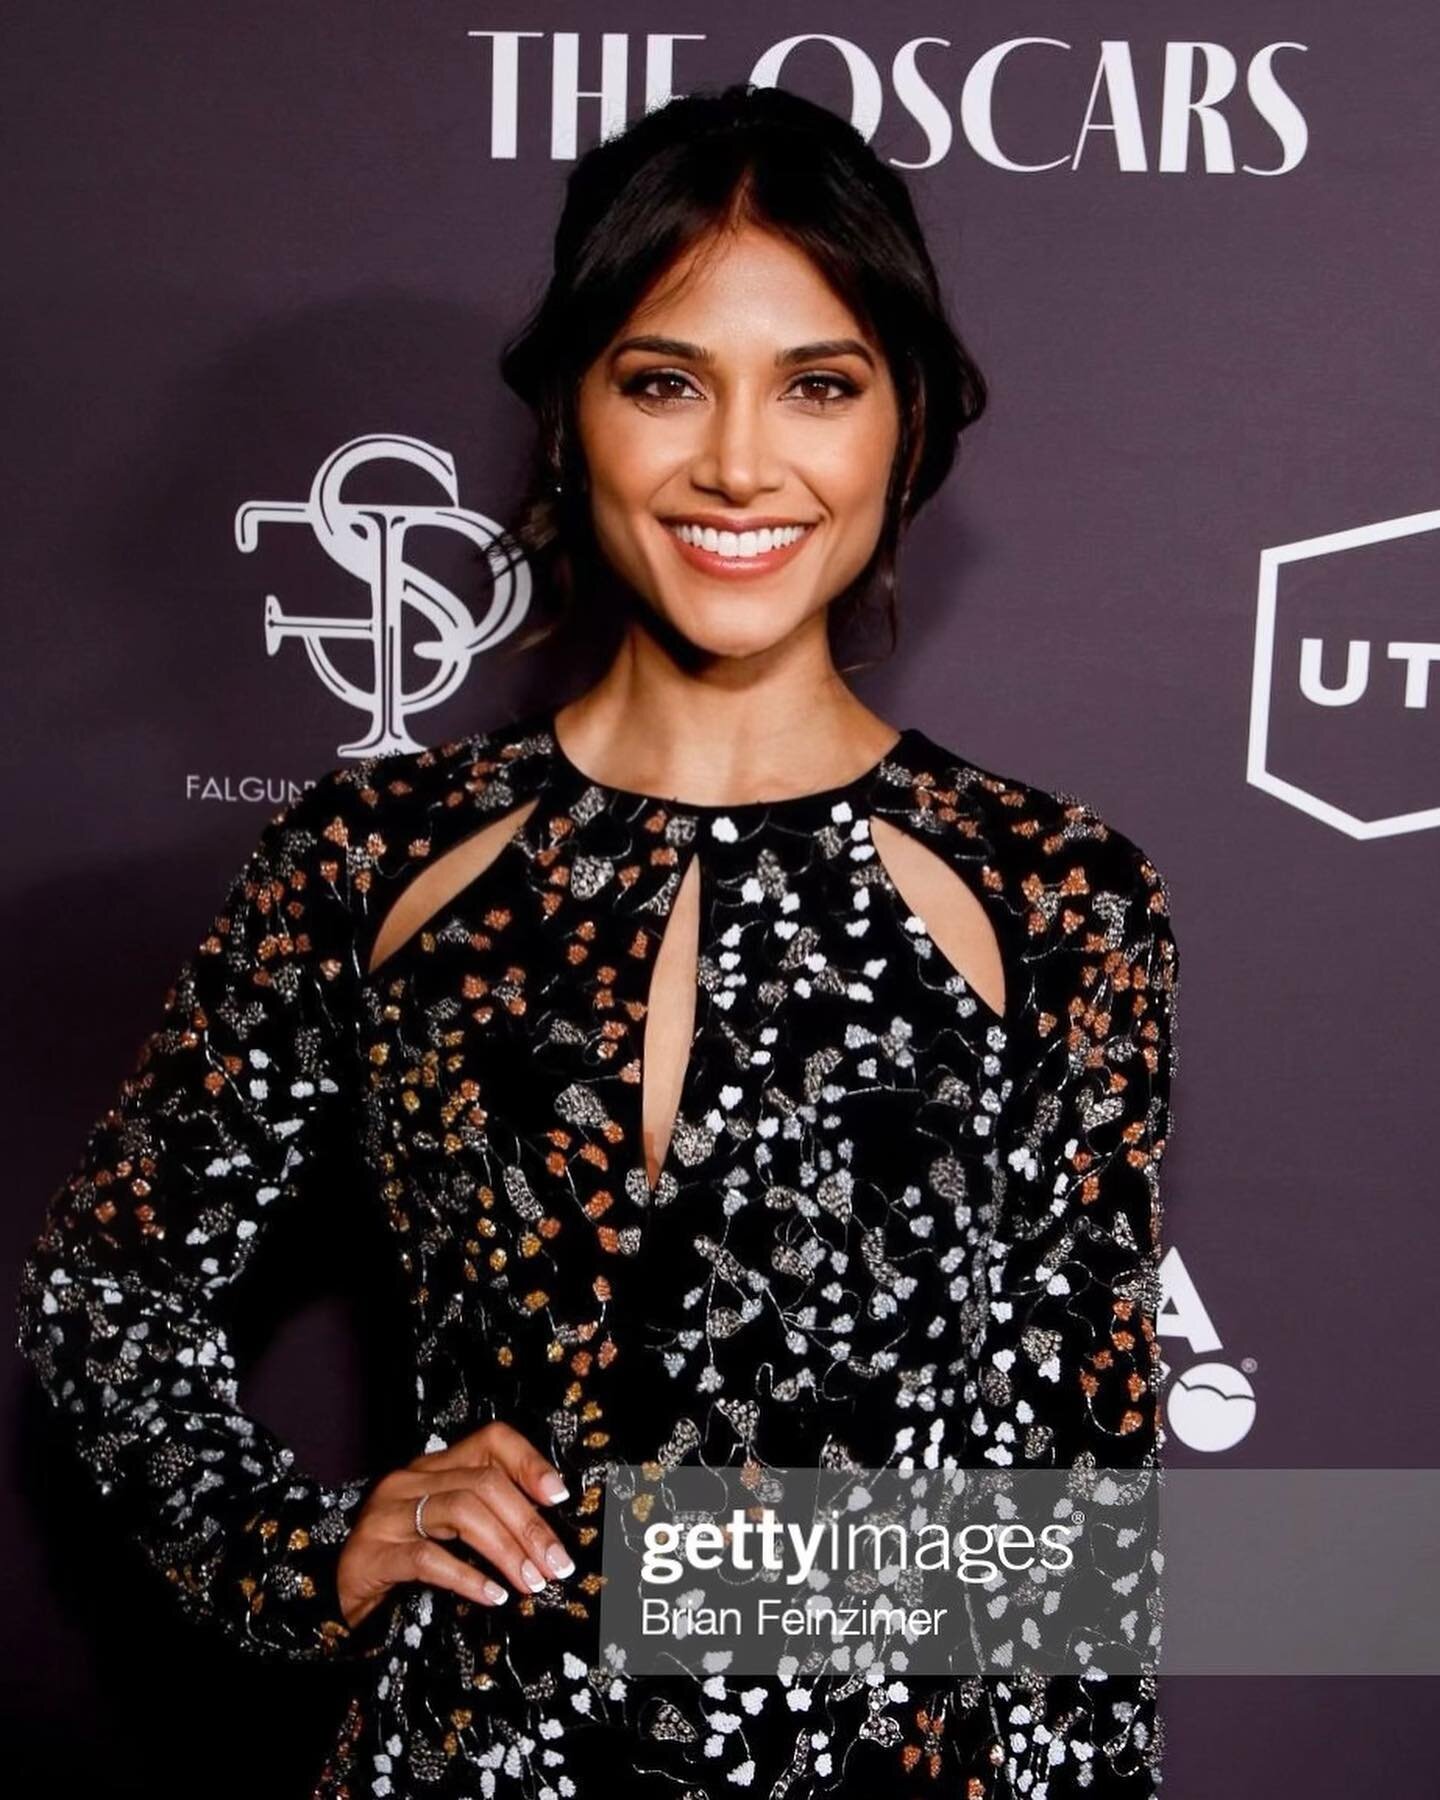 Celebrating South Asian excellence at the Oscars! Thank you to hosts @priyankachopra @anjula_acharia @mindykaling @malala @anitachatterbox @shrutirya @_productofculture_ and more for such an inspired evening!

Dress: @bibhumohapatra 
Earrings @deepag